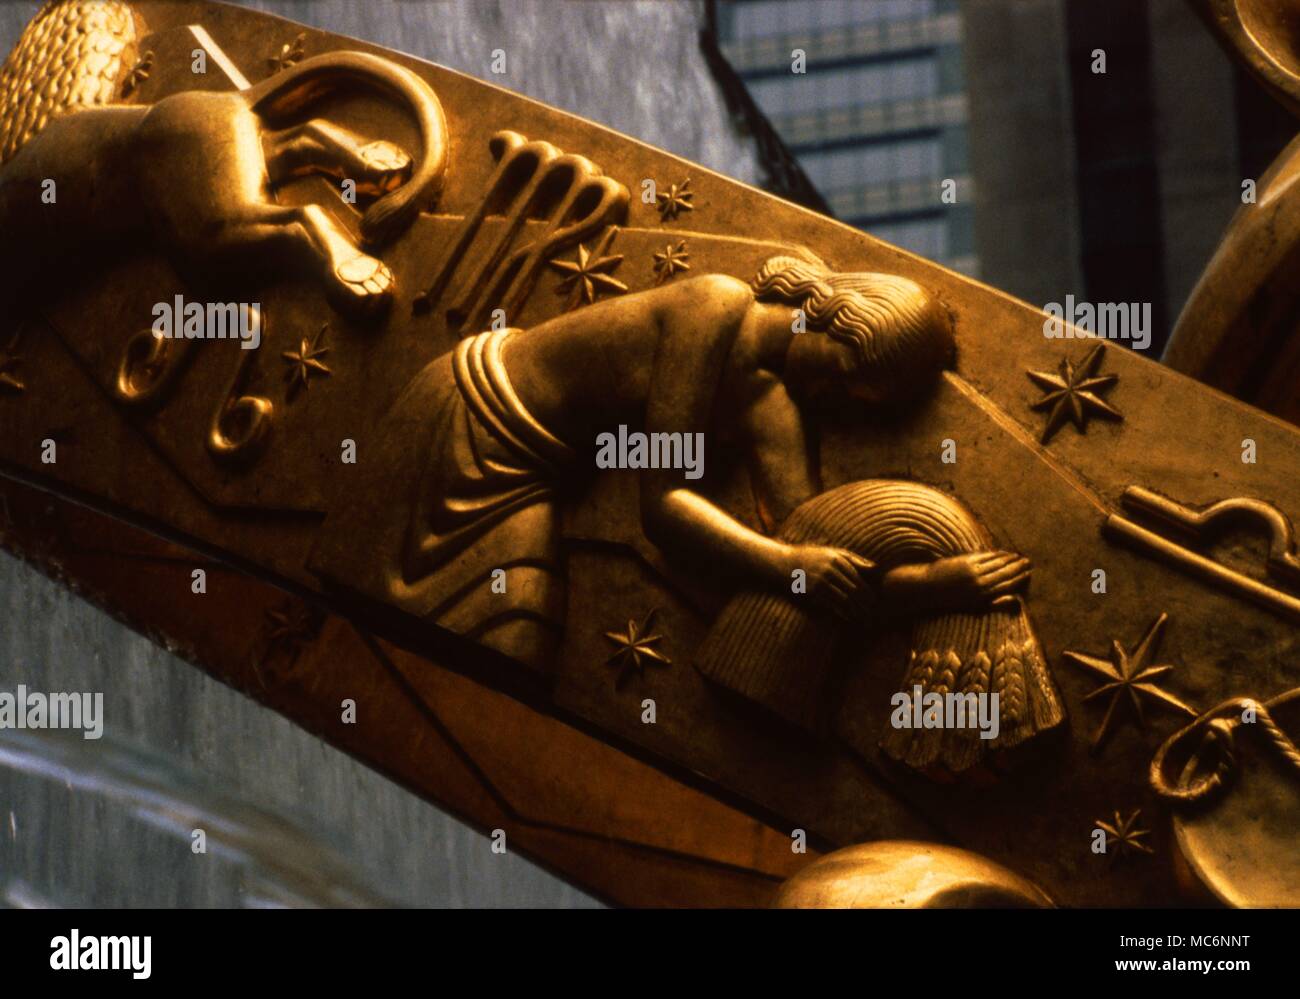 The Prometheus statue, in the lower plaza of the Rockefeller Centre, New York, was sculpted by Paul Manship. The sigil and image for Virgo is visible in the detail. Stock Photo